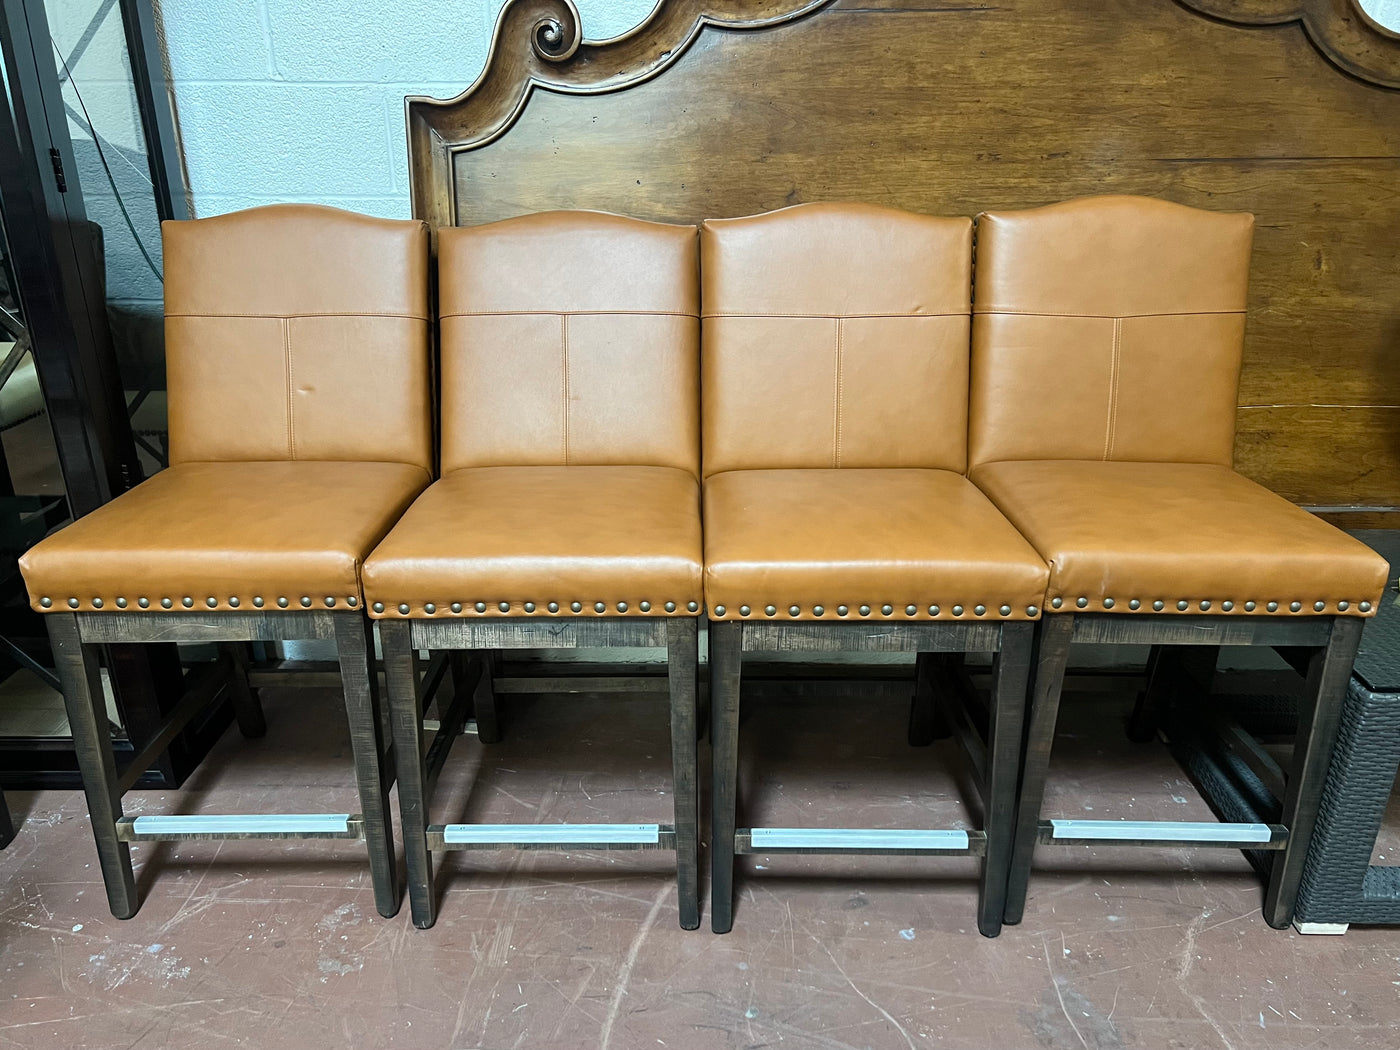 Canadel Leather Bar Stools